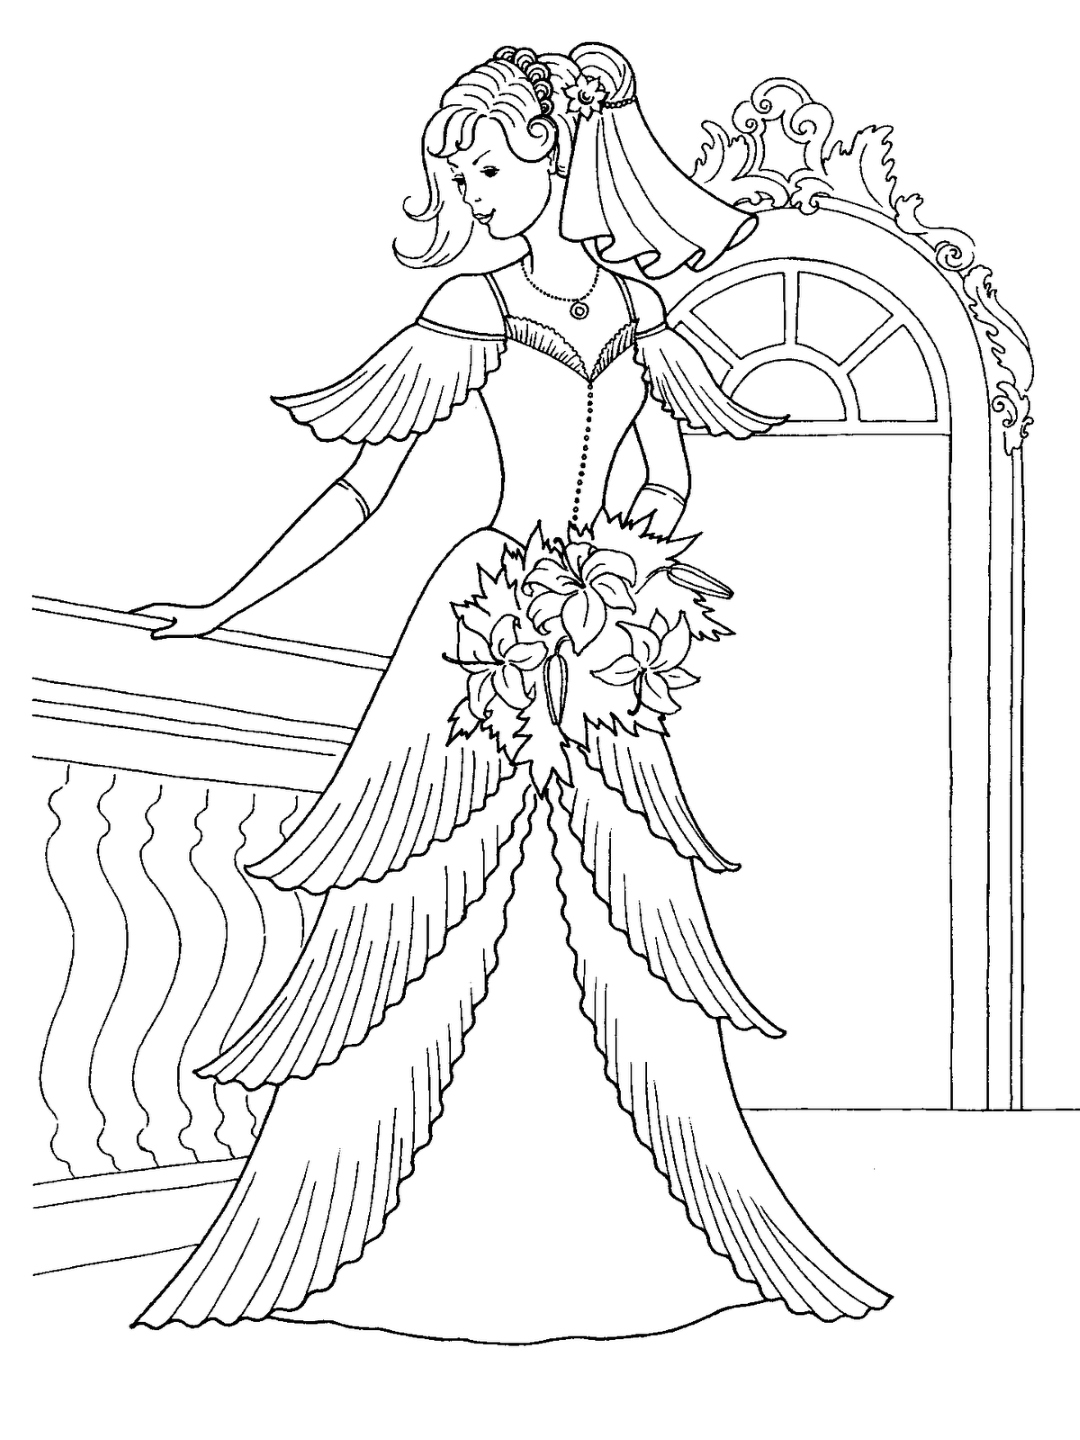 Wedding Dress Coloring Page2